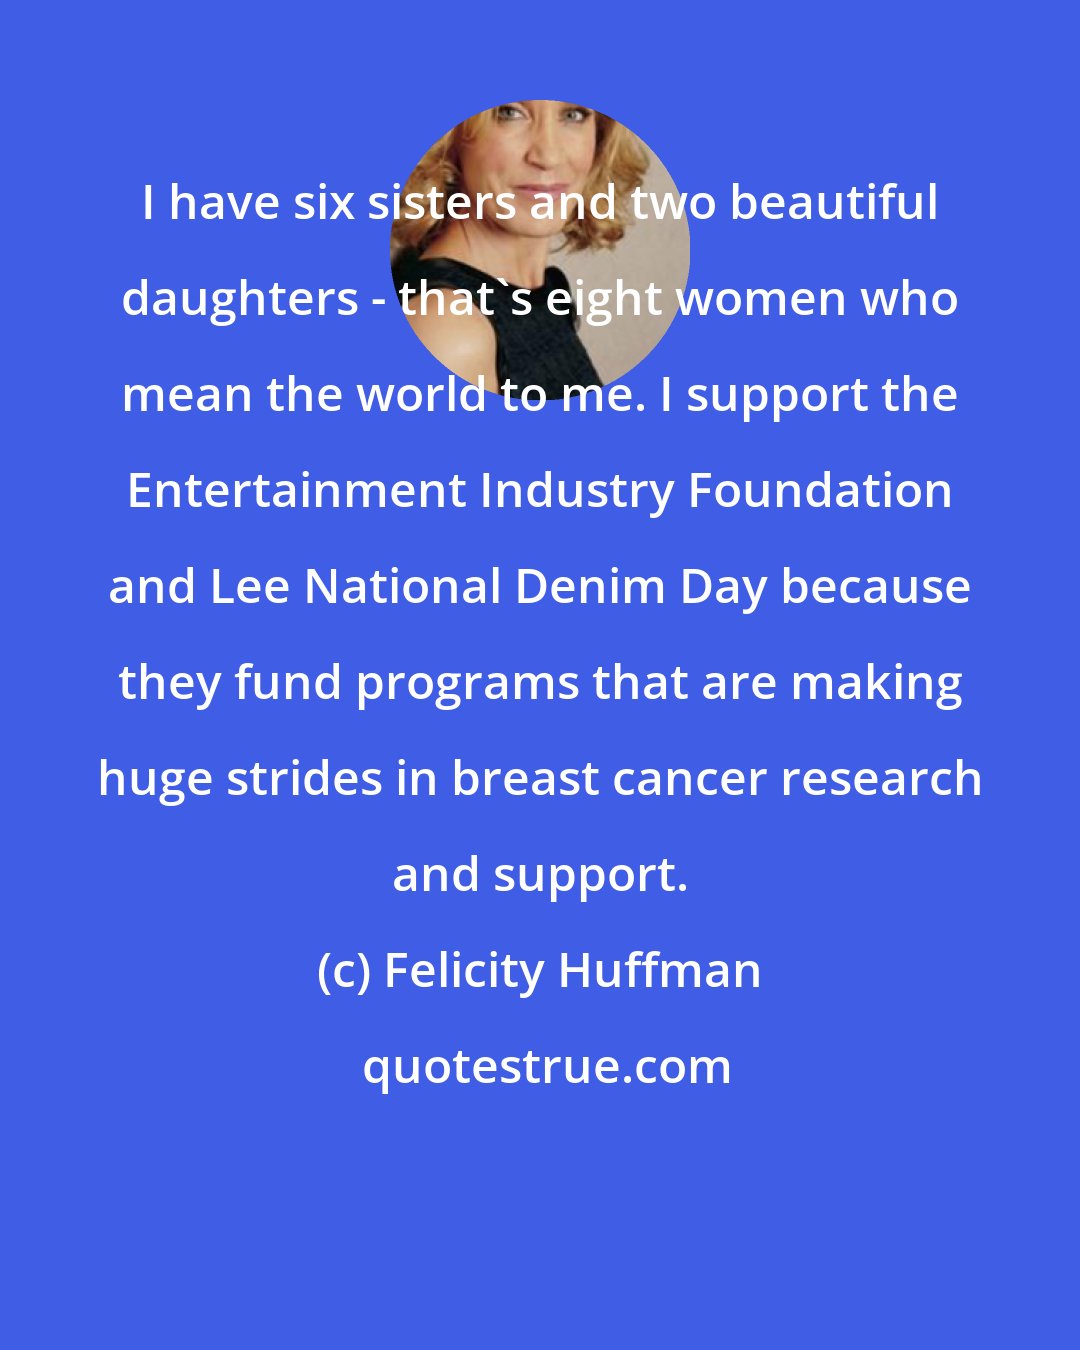 Felicity Huffman: I have six sisters and two beautiful daughters - that's eight women who mean the world to me. I support the Entertainment Industry Foundation and Lee National Denim Day because they fund programs that are making huge strides in breast cancer research and support.